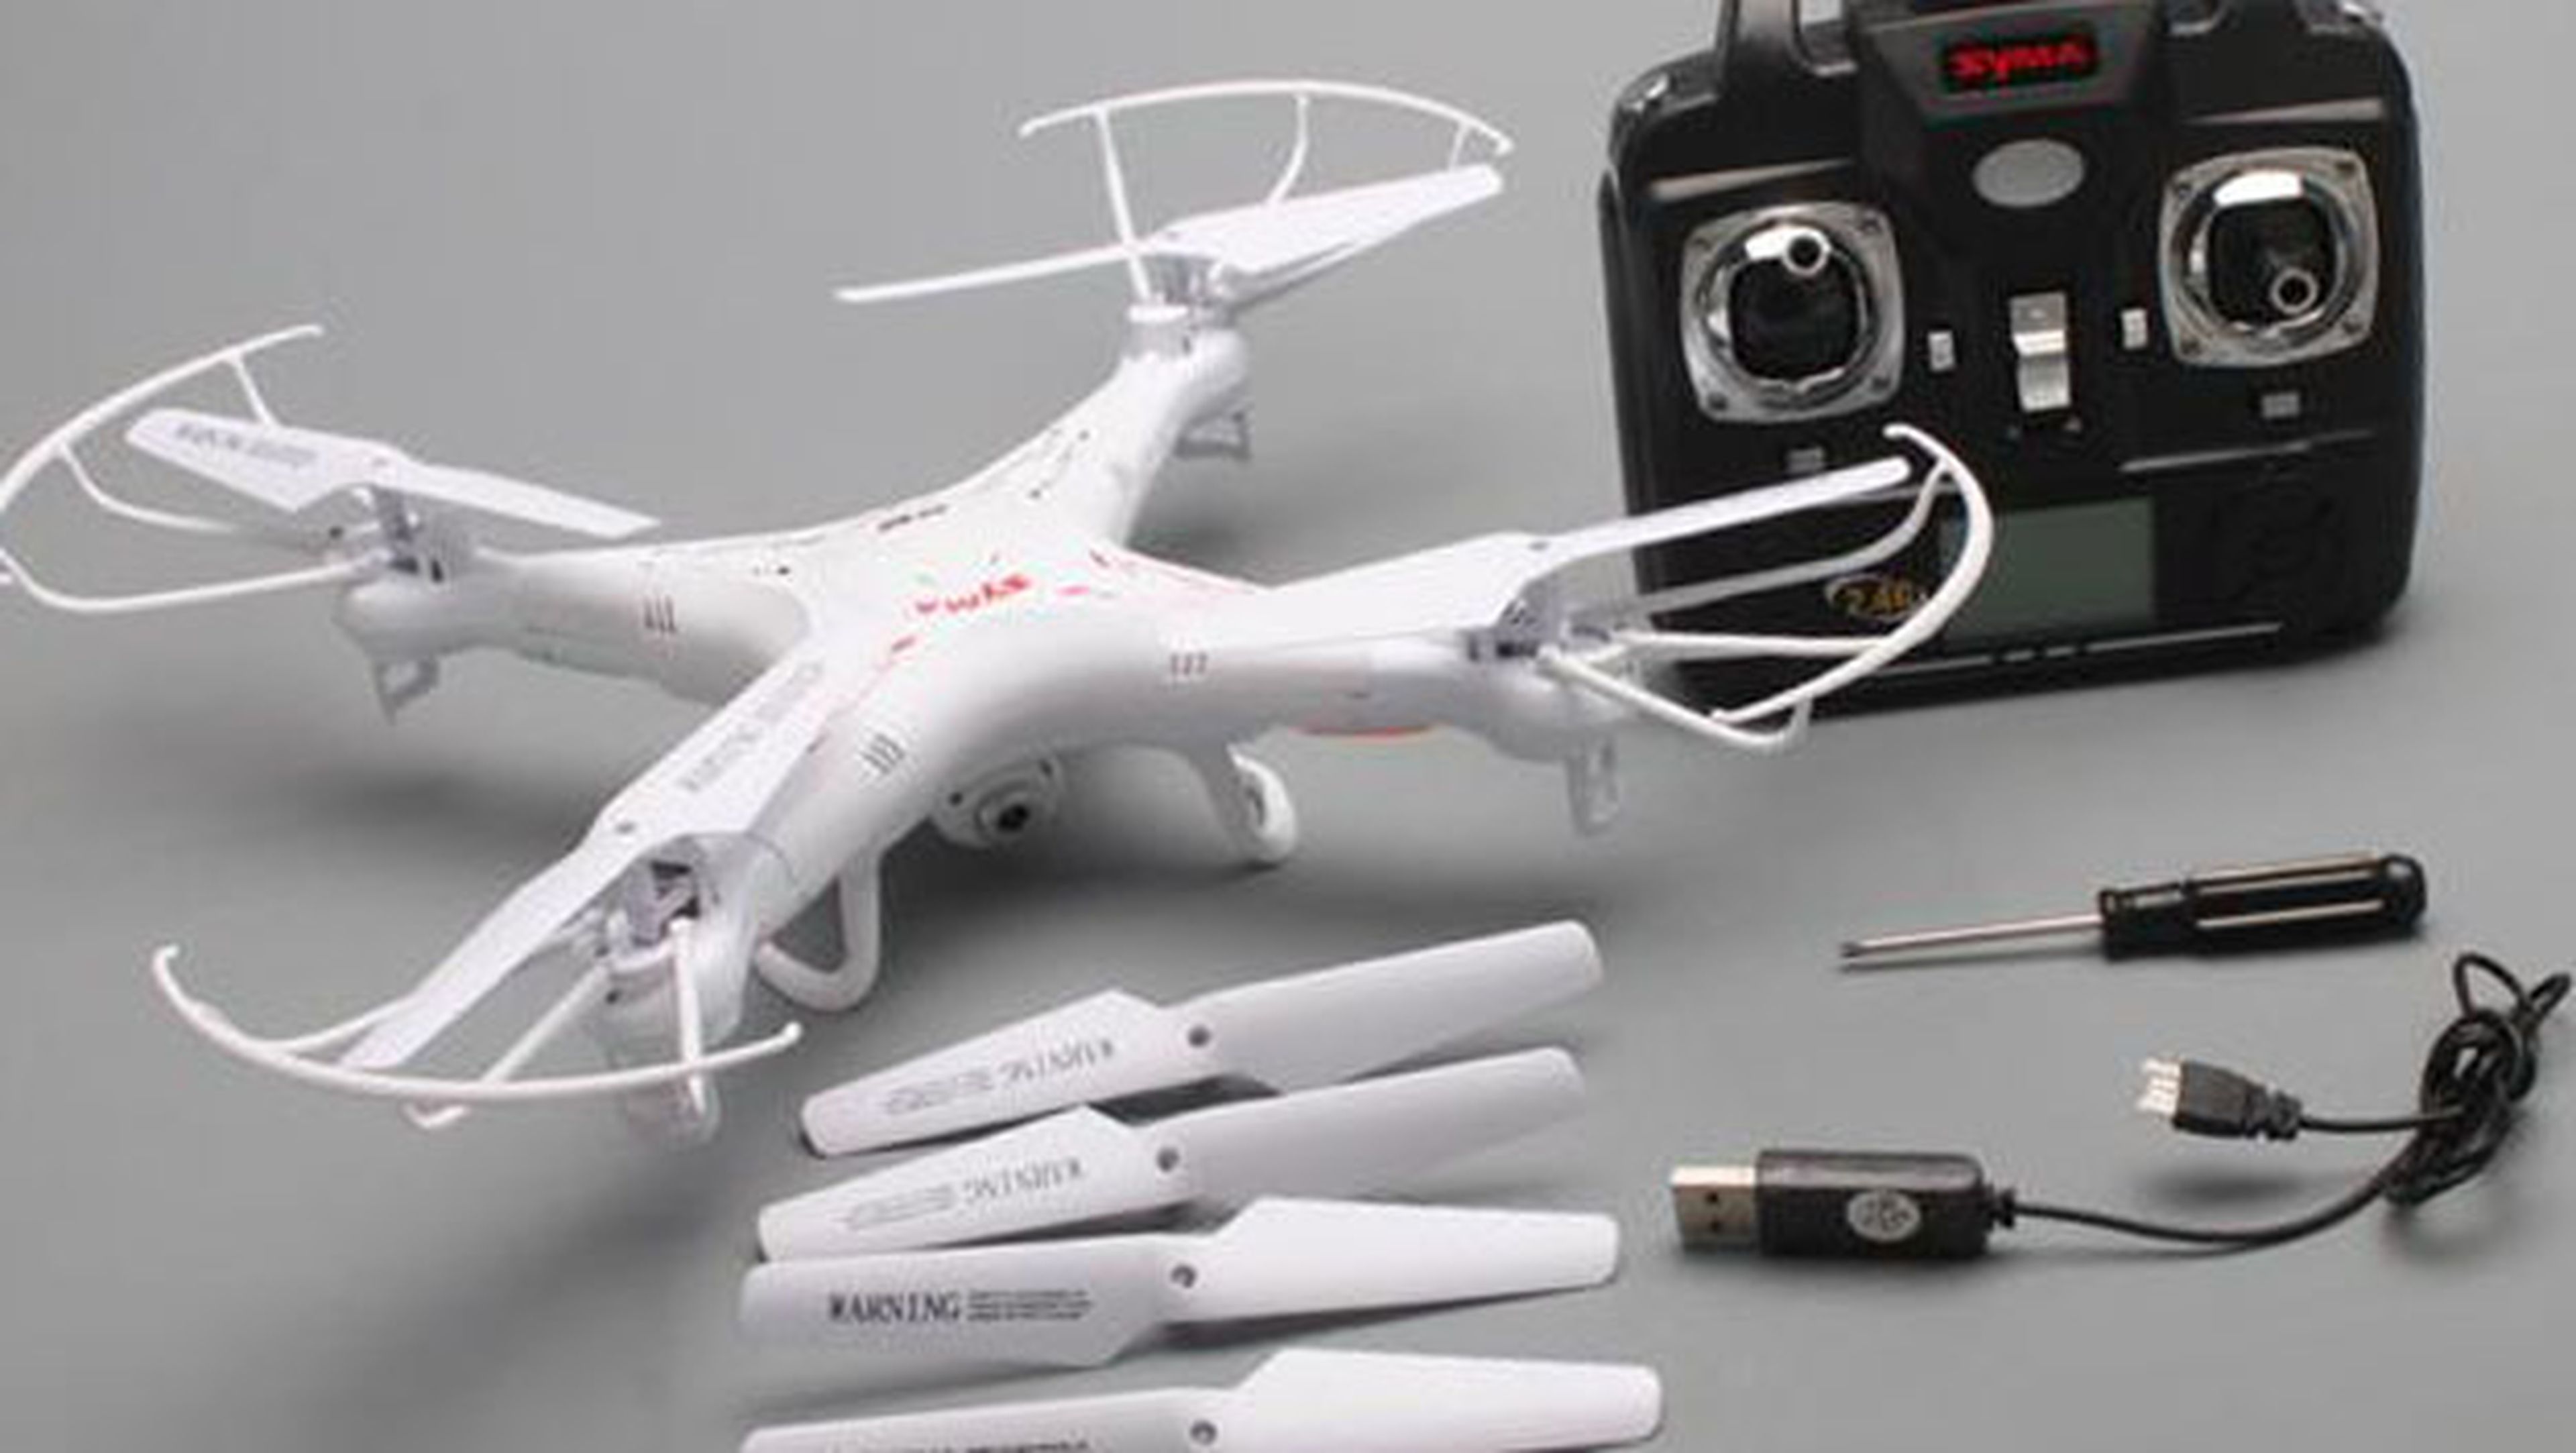 Syma X5C cool technology price you don't expect